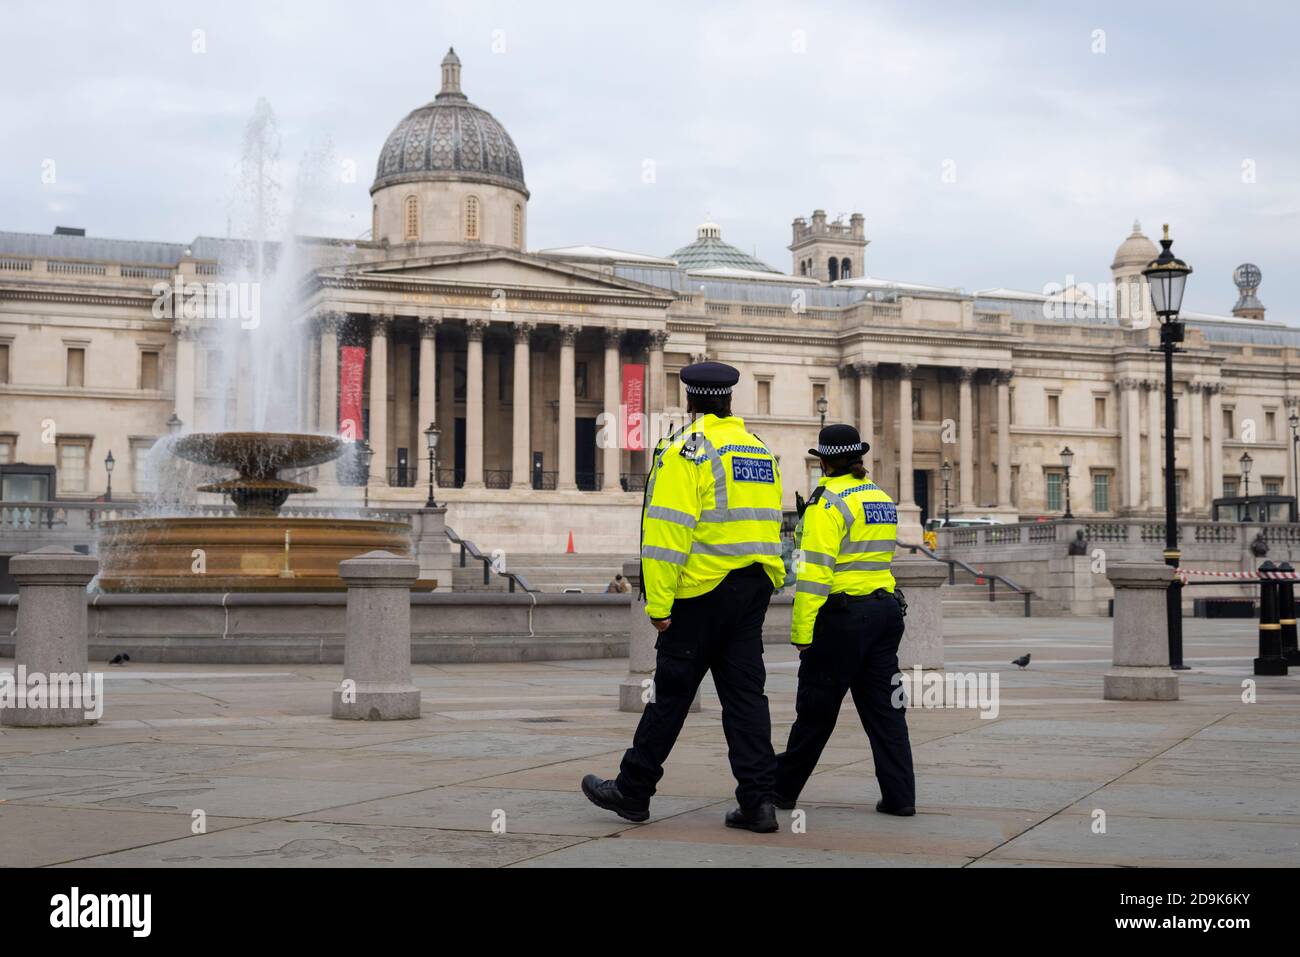 Police officers patrolling the beat in London, UK, on the first day of the second COVID-19 national lockdown, in Trafalgar Square. Protest risk Stock Photo